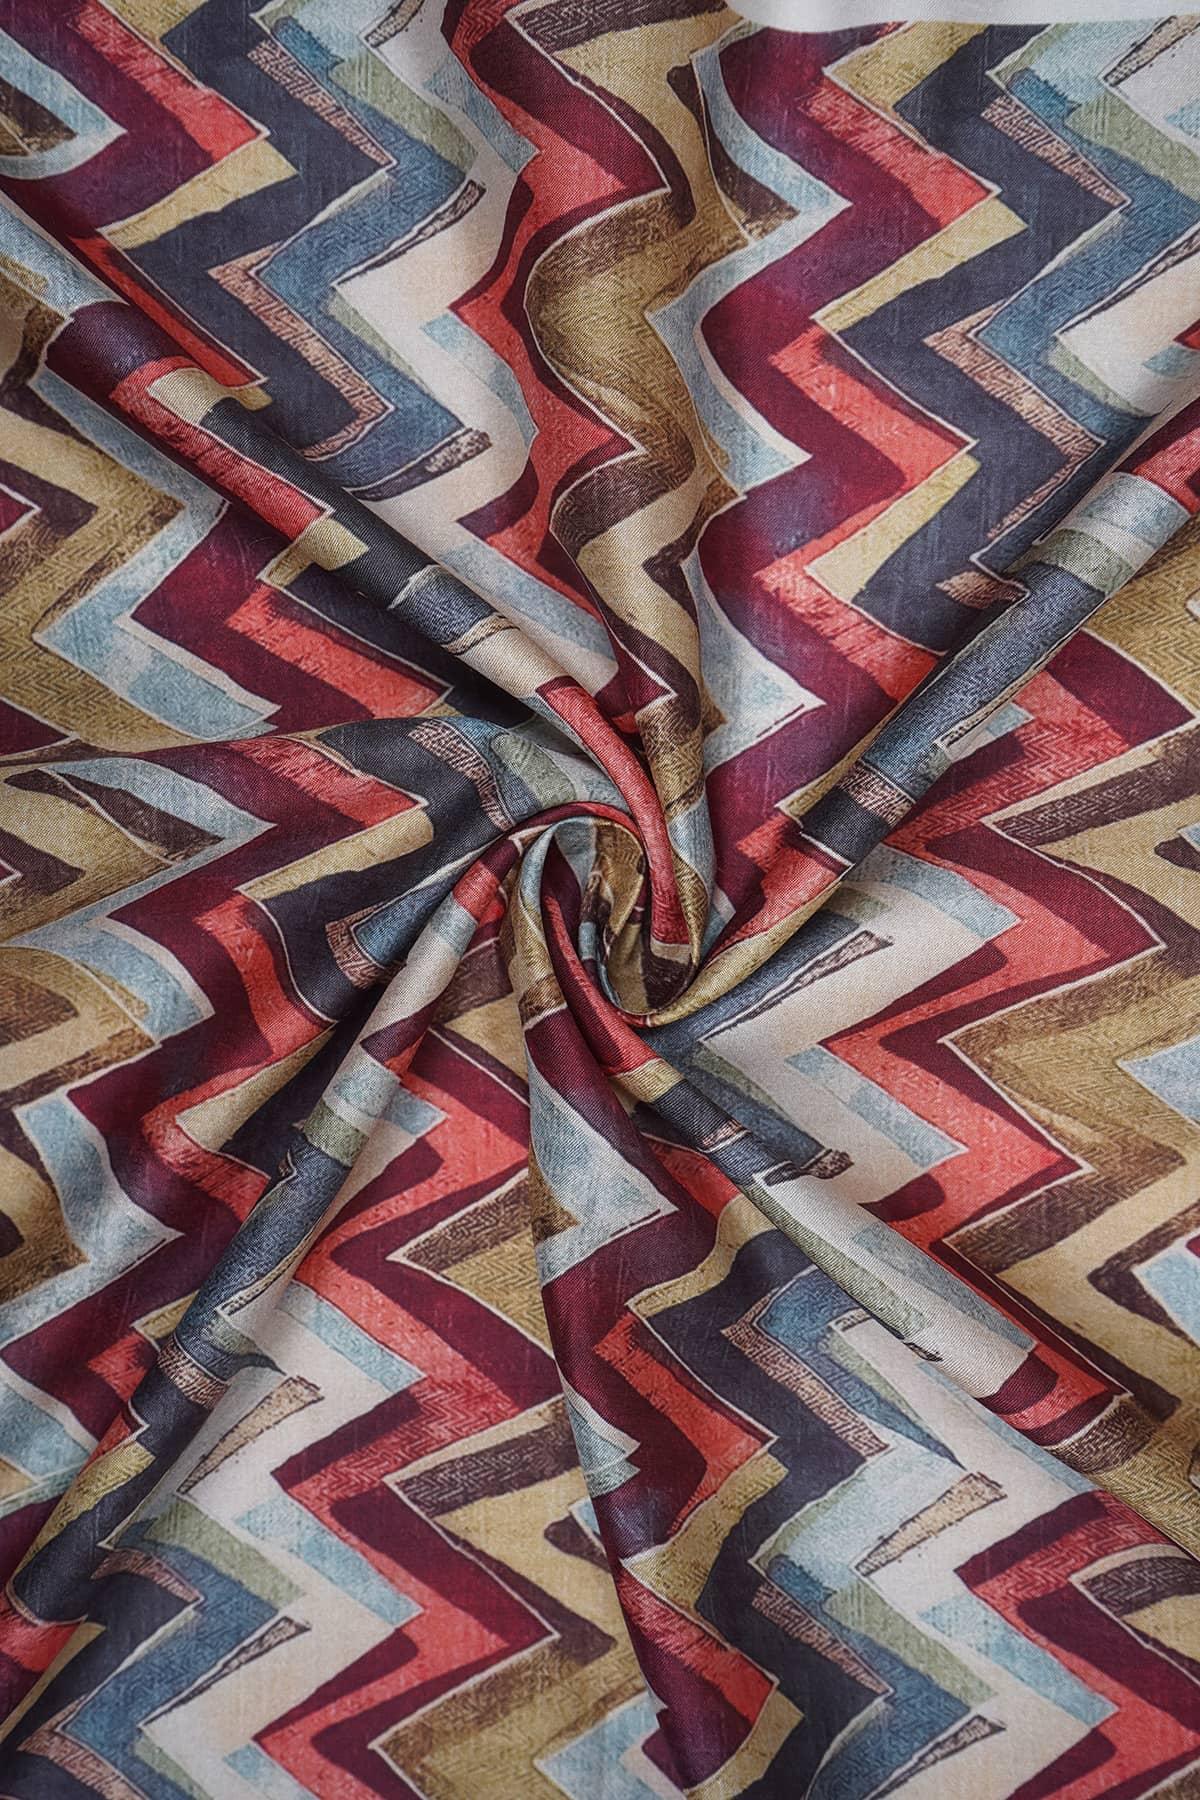 Multicolor Zigzag Pattern Digitally Printed on Yesha Silk - saraaha.com - Casual, Digital Print, dresses and more, Formal, gowns, Home decor, indo western, kurtas, Quirky, Shirts, SILK, skirts, Suits, tops, Yesha Silk